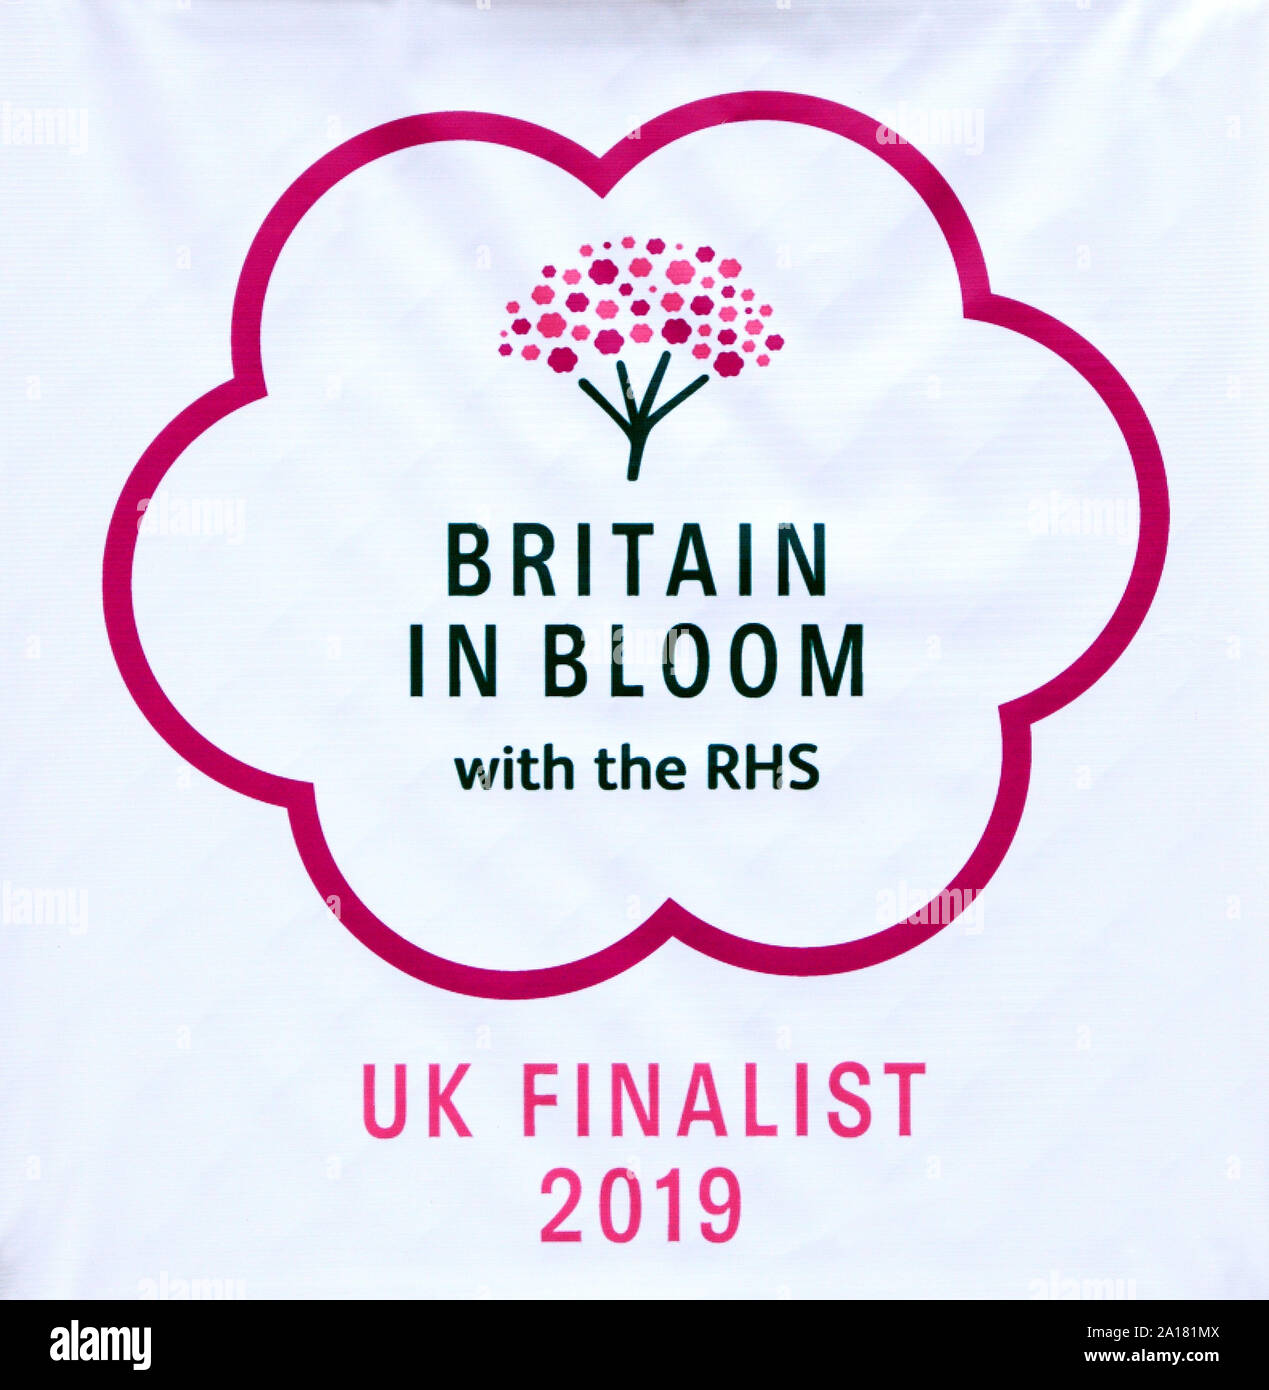 Britain in Bloom, with the RHS, UK Finalist 2019, banner, award Stock Photo